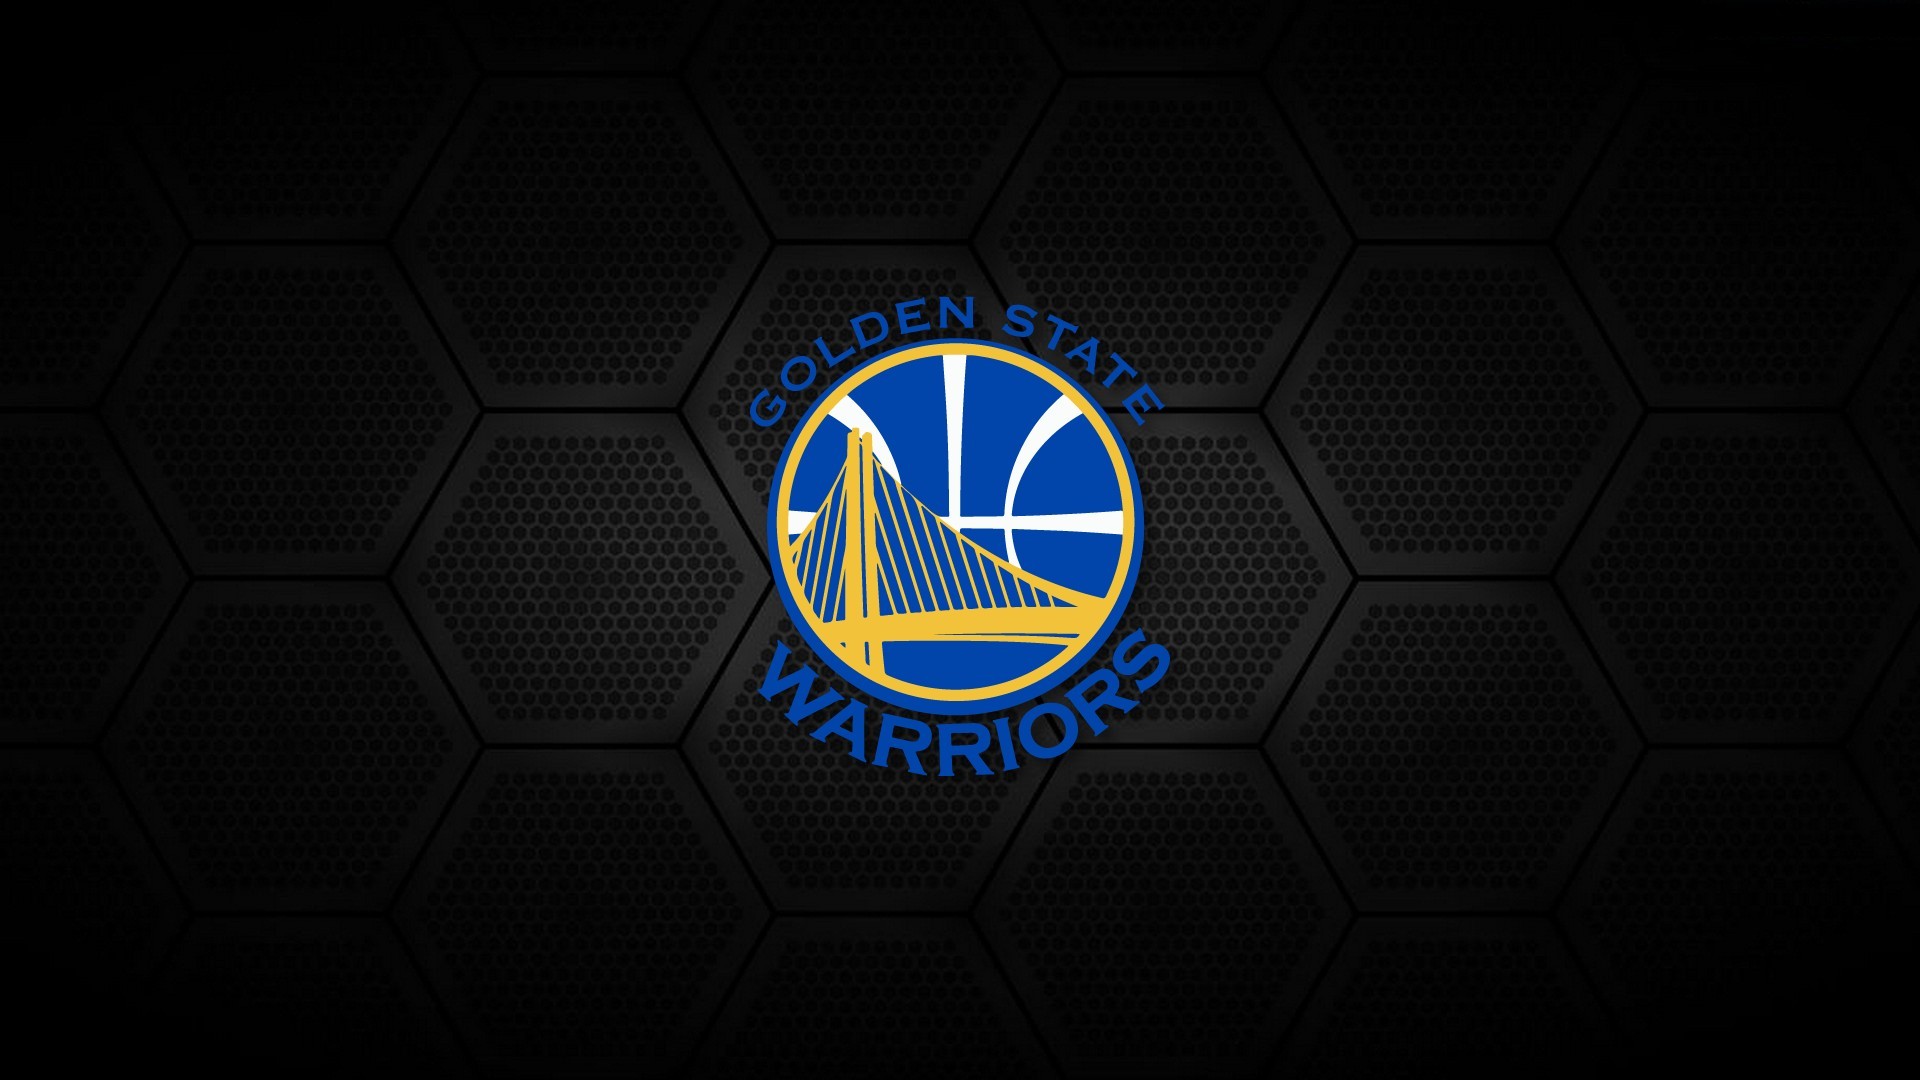 1920x1080 Golden State Warriors Logo For Mac Wallpaper with image dimensions   pixel. You can make